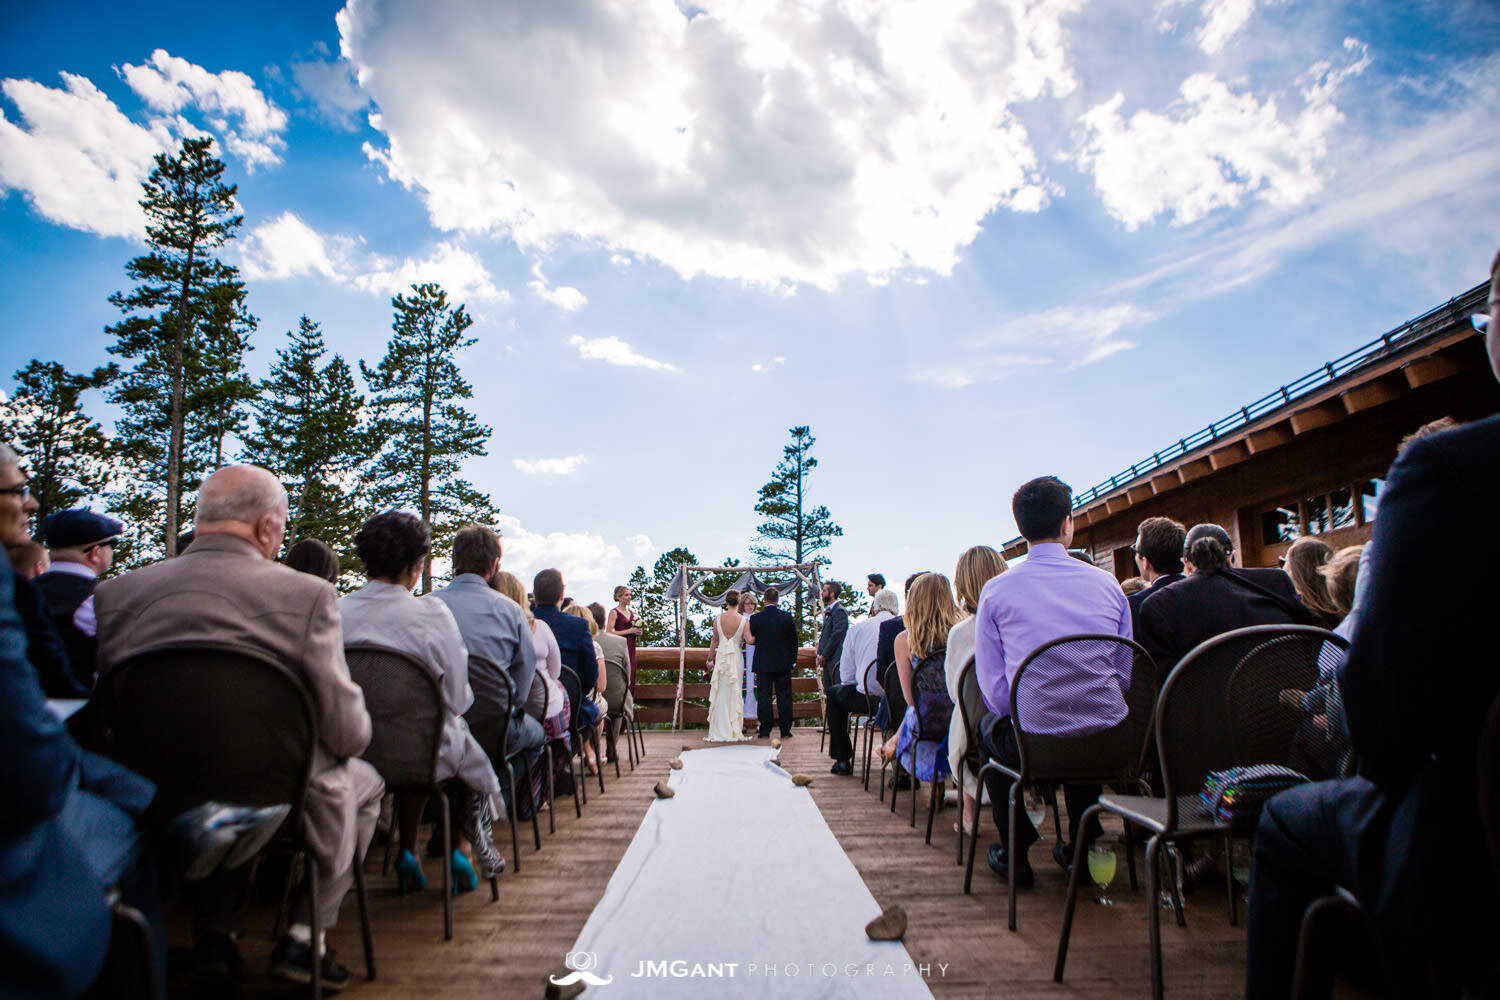  Fun Winter Park, mountain wedding at the Lodge at Sunspot, photographed by JMGant Photography 